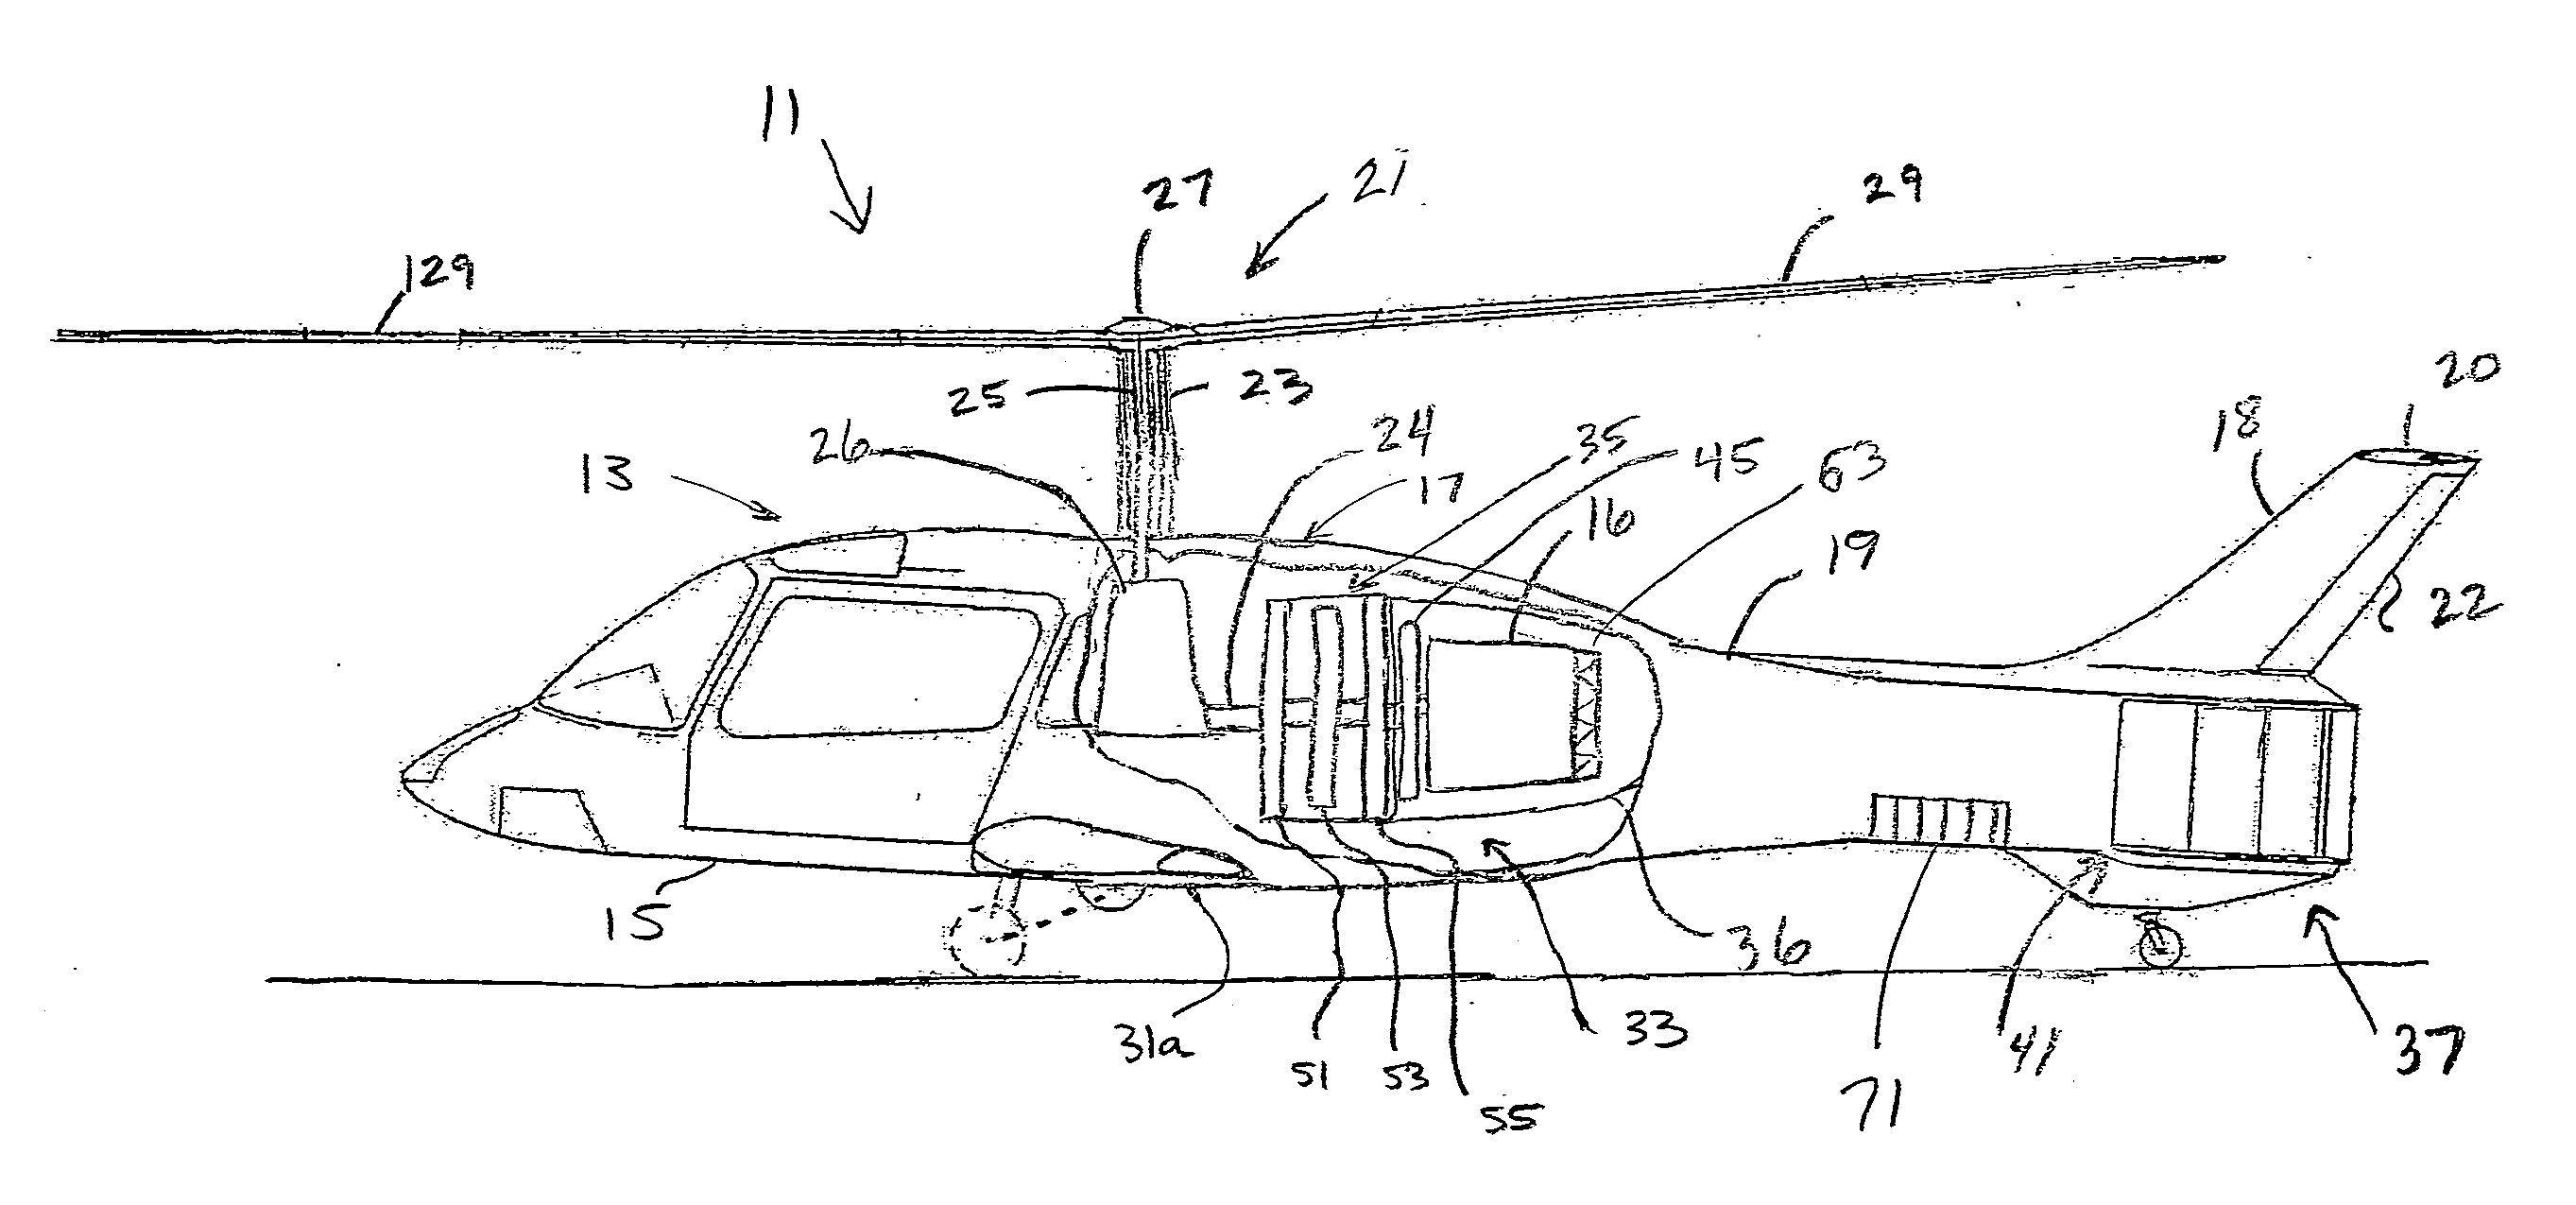 Propulsive Anti-Torque System for Rotorcraft